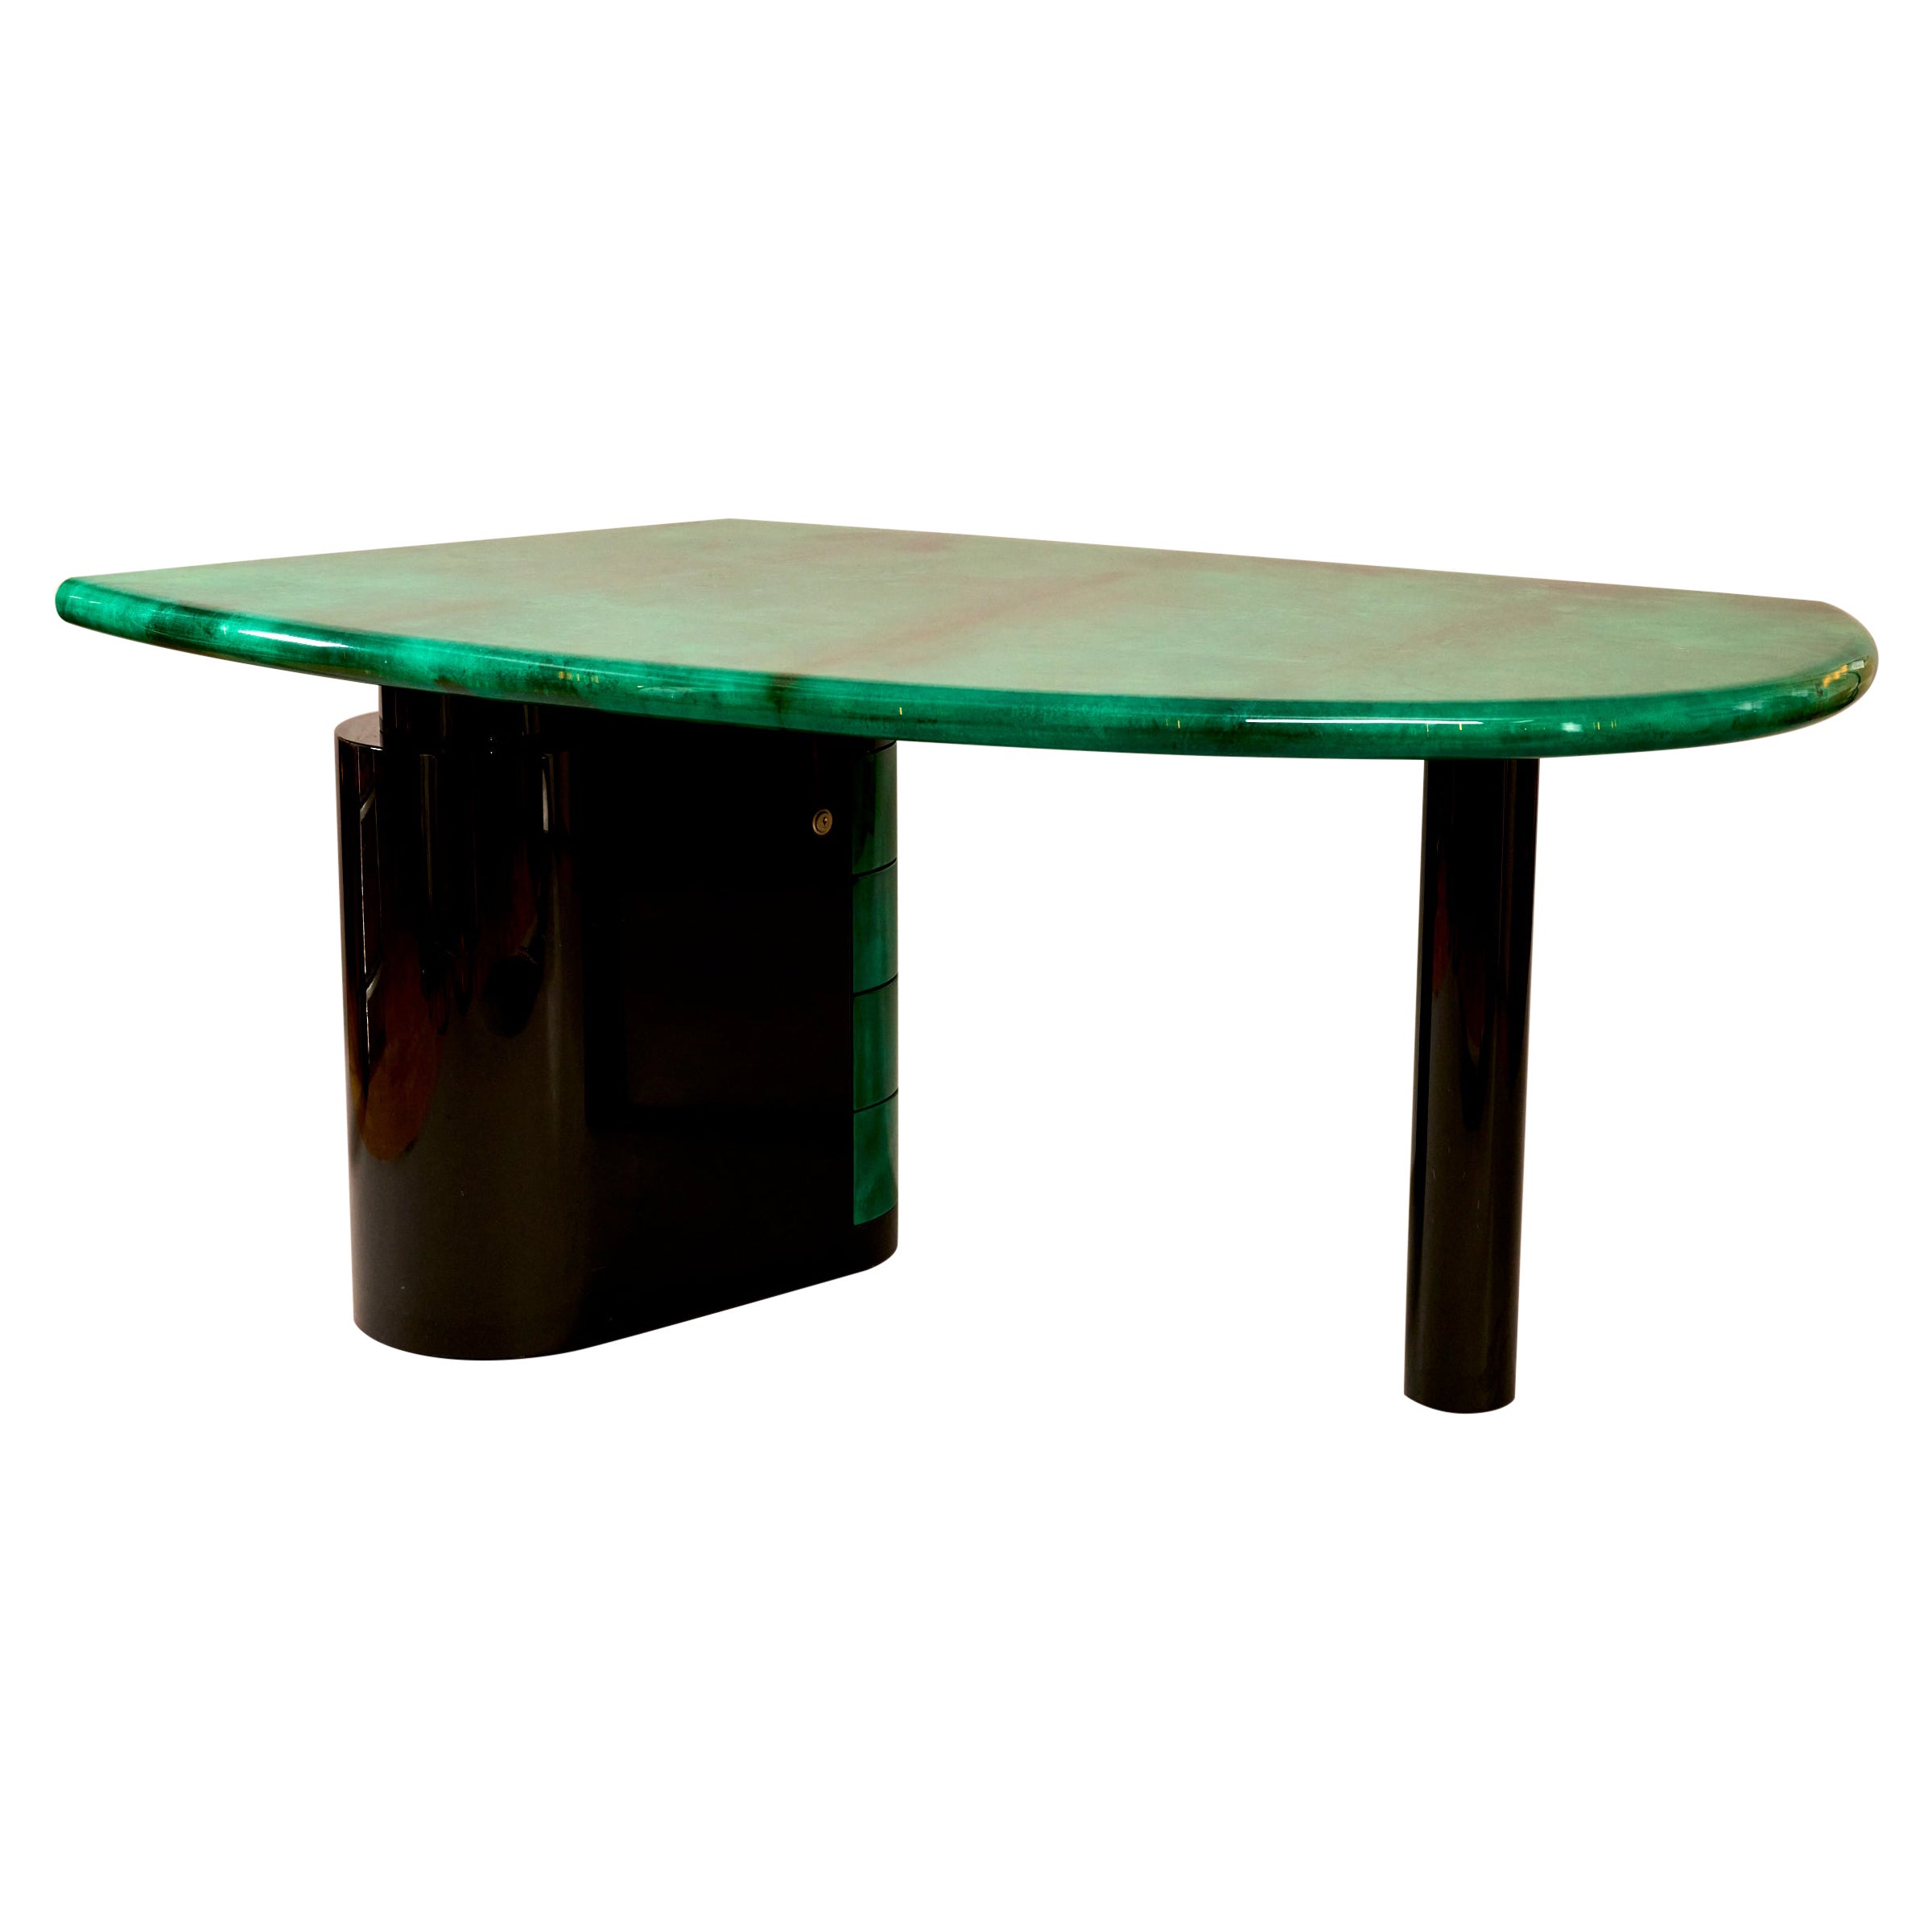 Rare Aldo Tura desk in malachite green parchment and black lacquer. 

The top is goatskin with a high gloss lacquer.

Four pedestal drawers. And black high gloss lacquer. 
